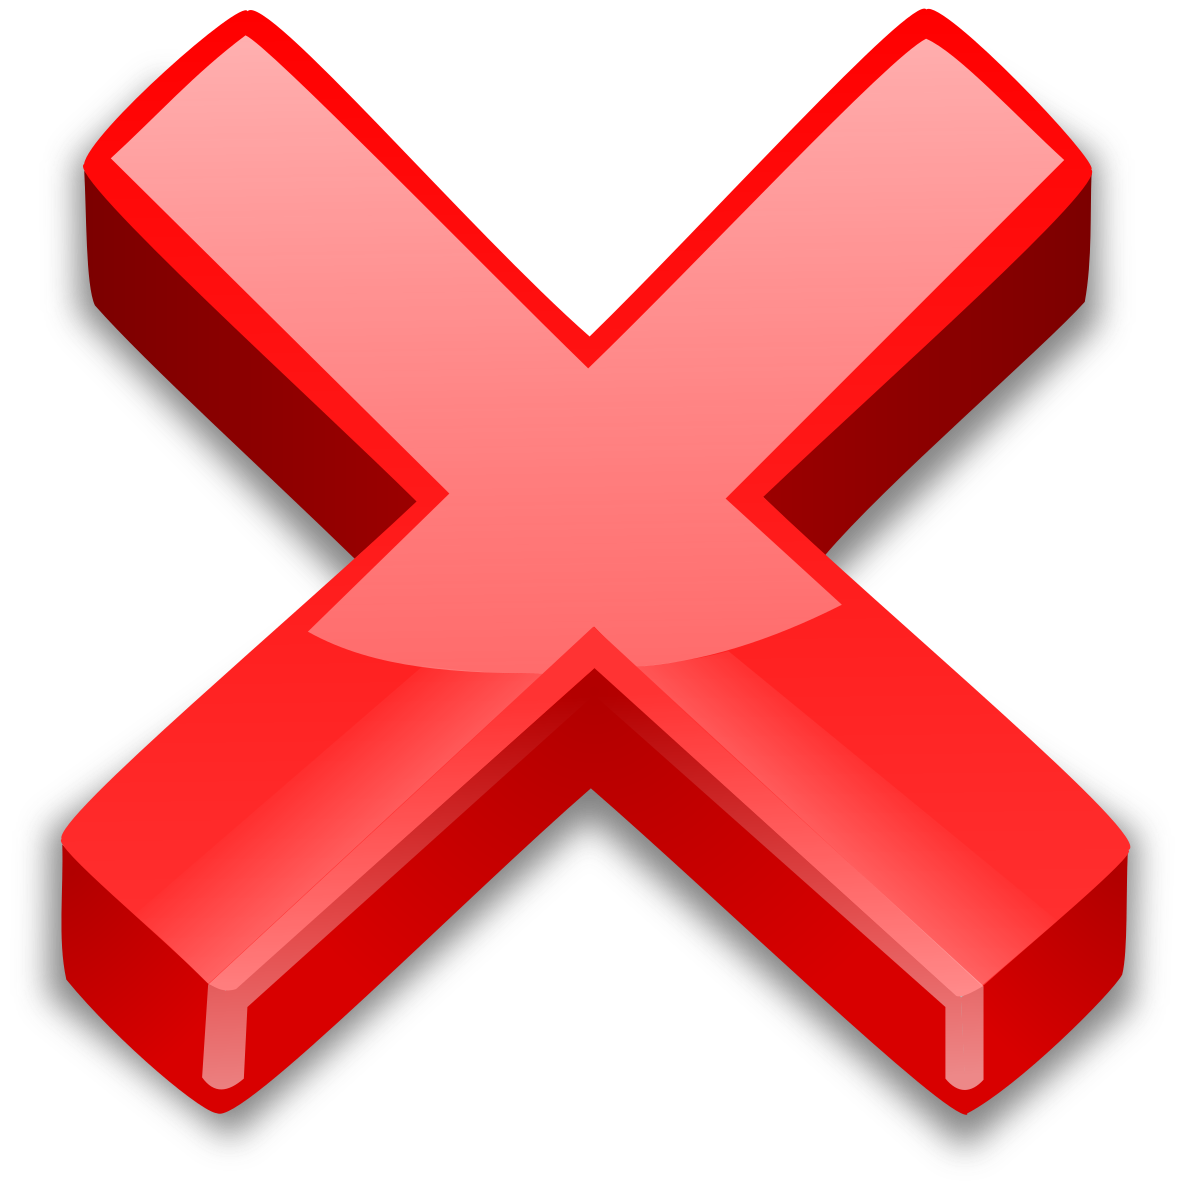 Cross Cancel Button PNG Image Background